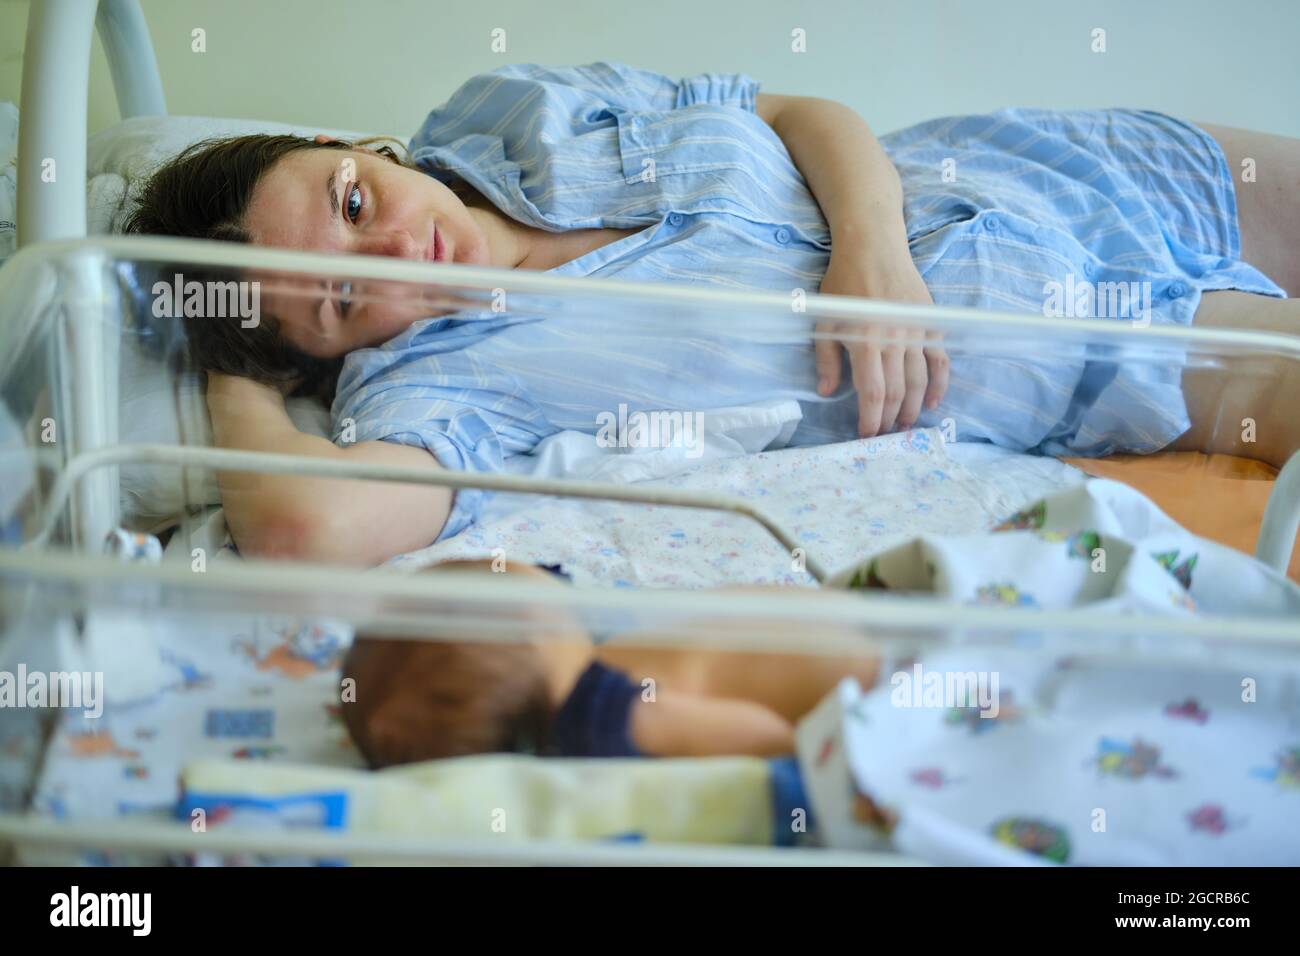 Mom is sleeping in the ward with a newborn baby, a maternity hospital bracelet on her arm. A newly born child in a clinic crib behind a transparent gl Stock Photo